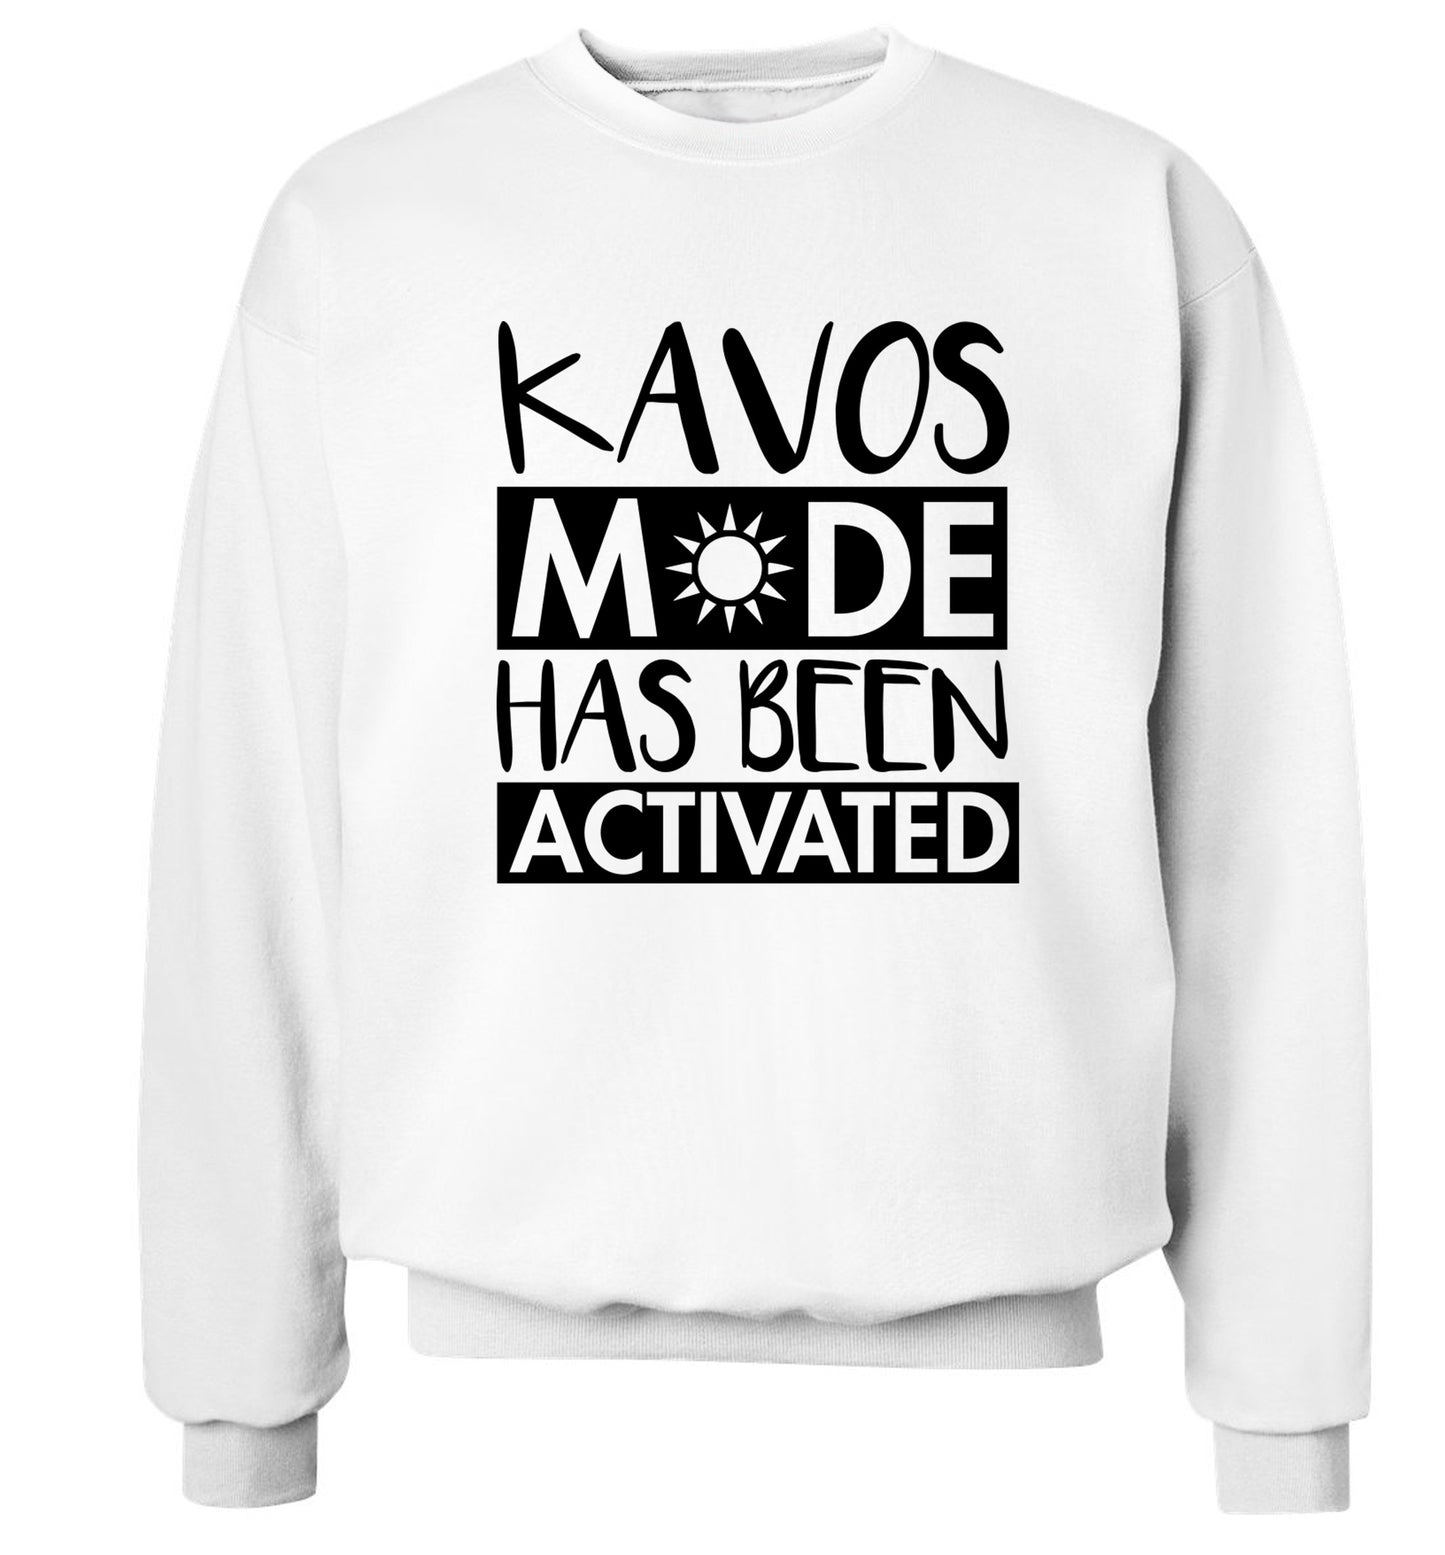 Kavos mode has been activated Adult's unisex white Sweater 2XL